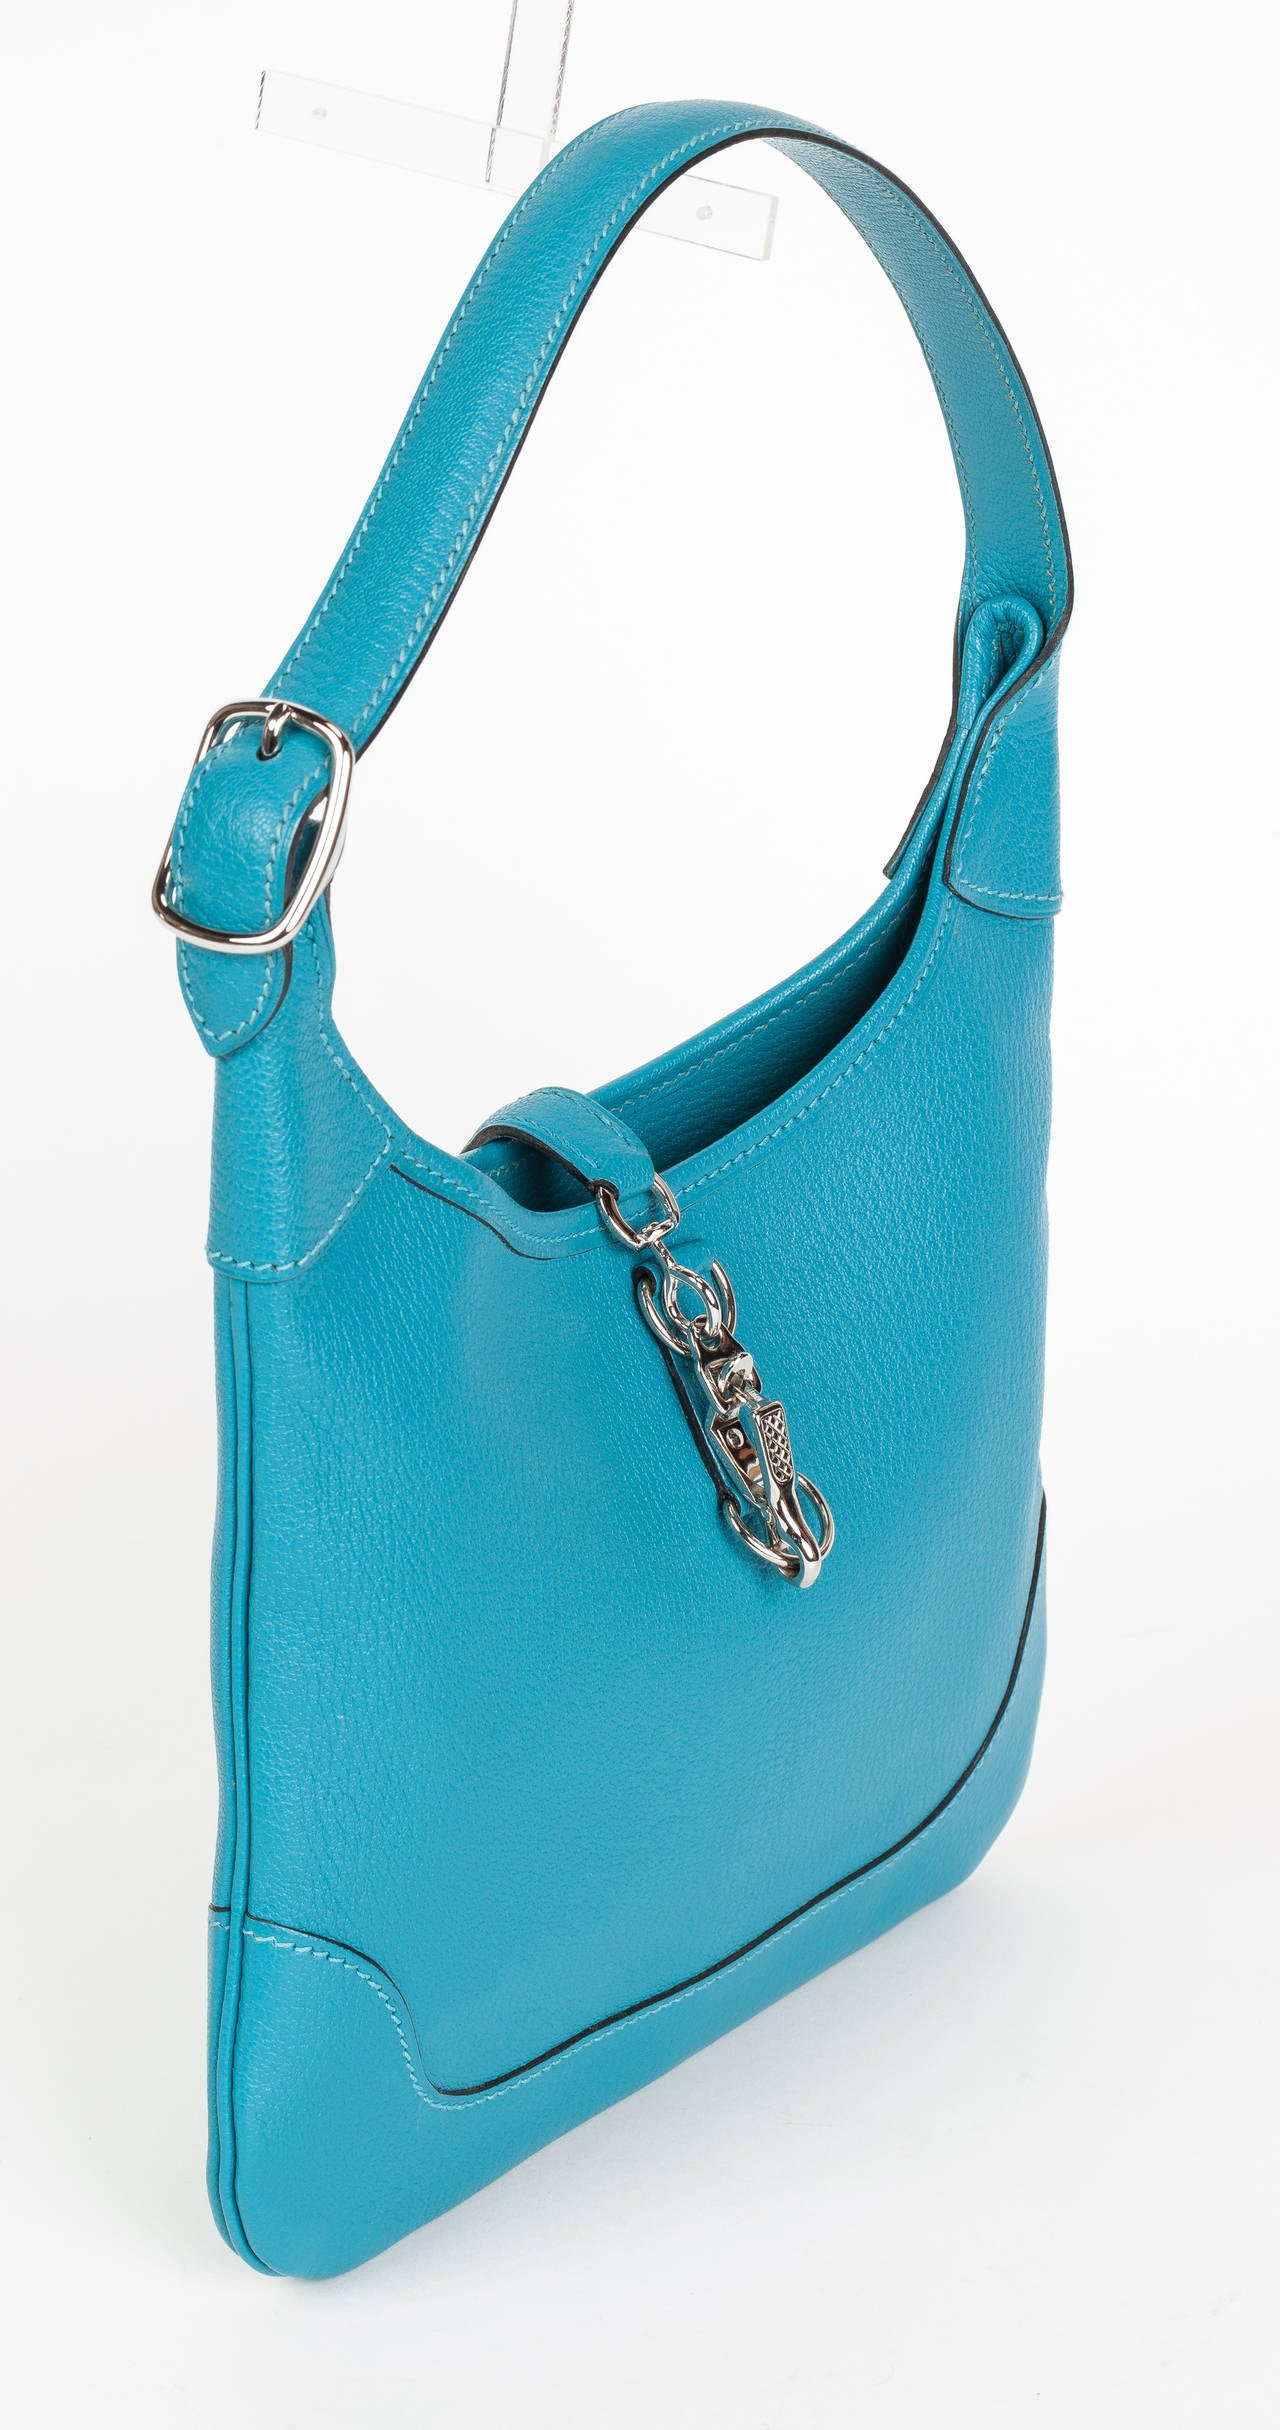 2004 Hermes Turquoise Chevre Mystore leather 24cm mini trim bag with palladium hardware. Features one non-adjustable shoulder strap and an interior slip pocket. Stamped Hermes with blind stamp on underside of shoulder strap at buckle. In excellent